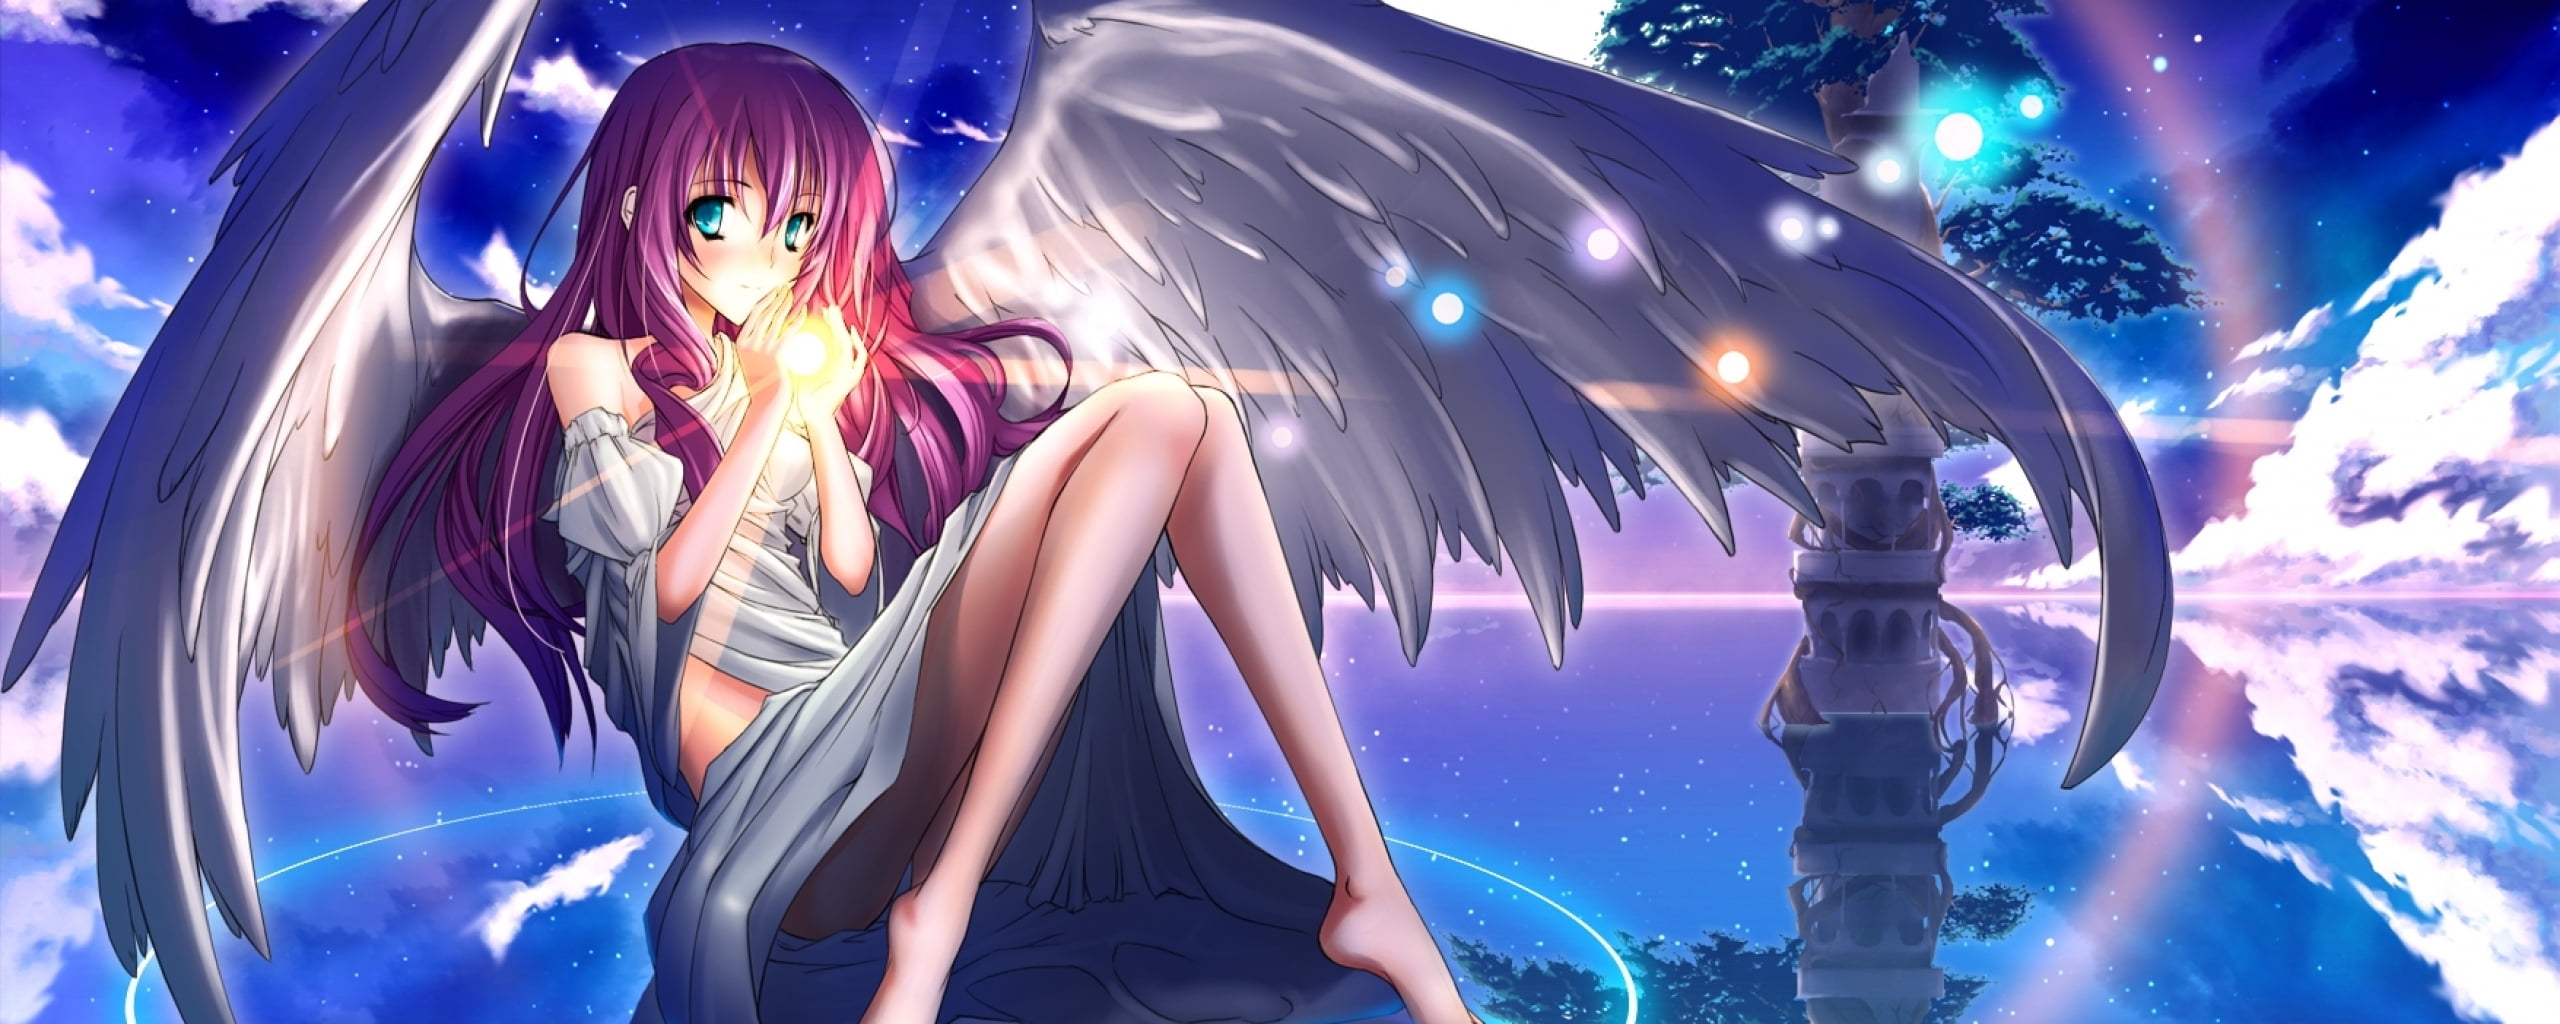 Female anime character with wings